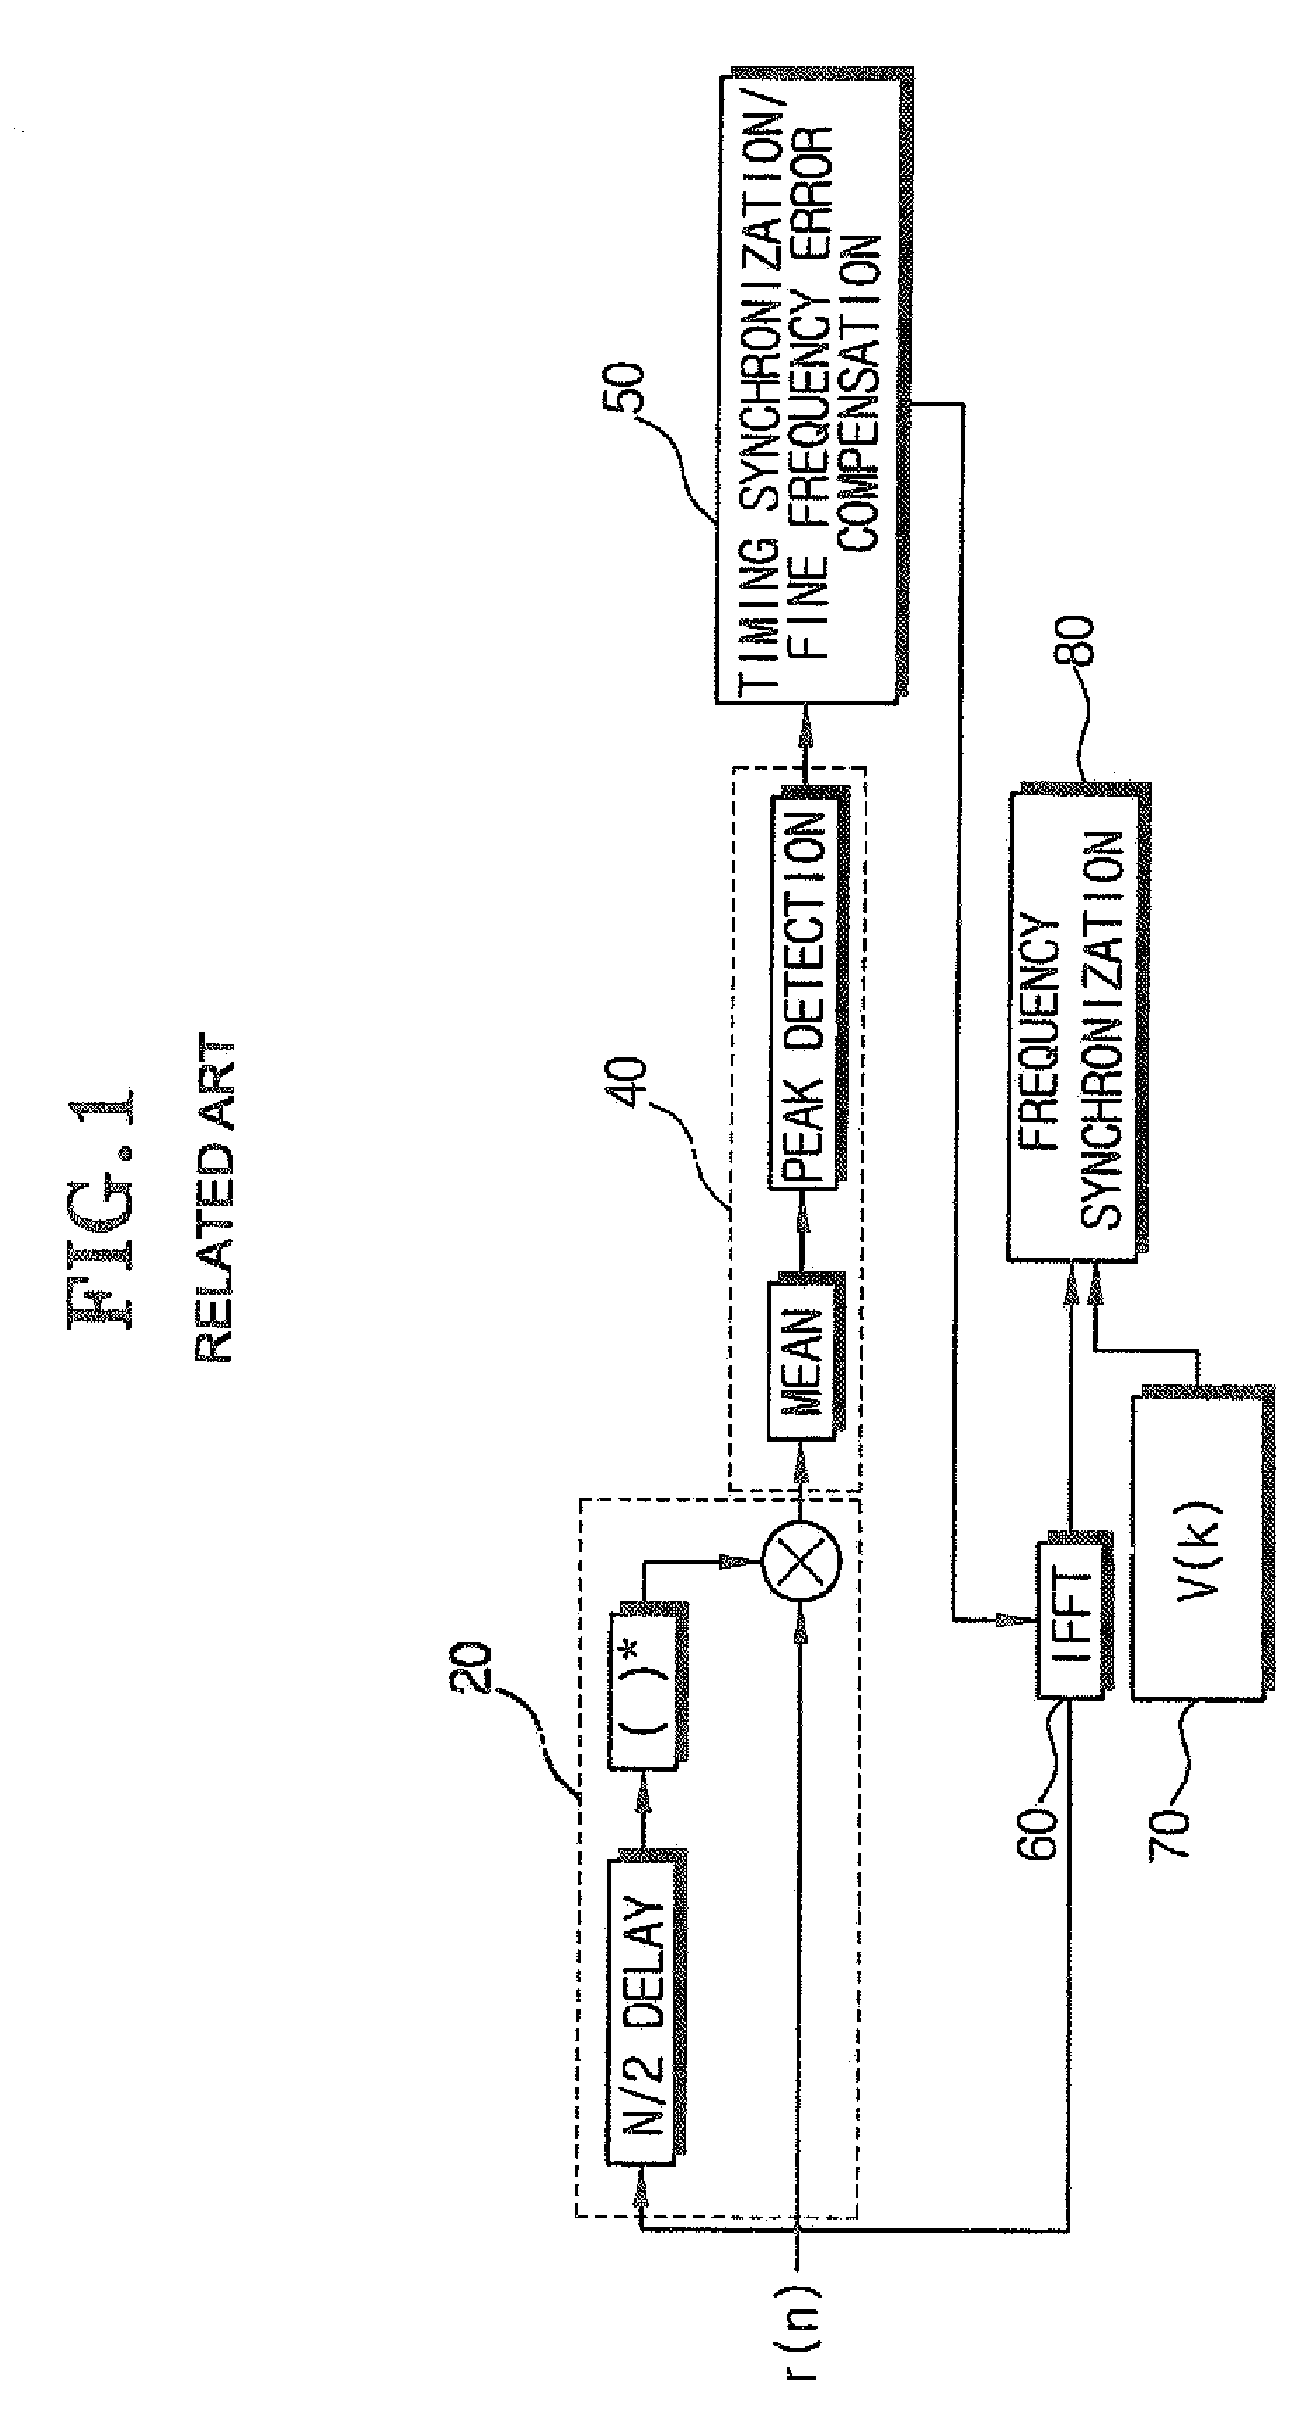 Method for creating symmetric-identical preamble and method for synchronizing symbol and frequency of orthogonal frequency division multiplexed signals by using symmetric-identical preamble